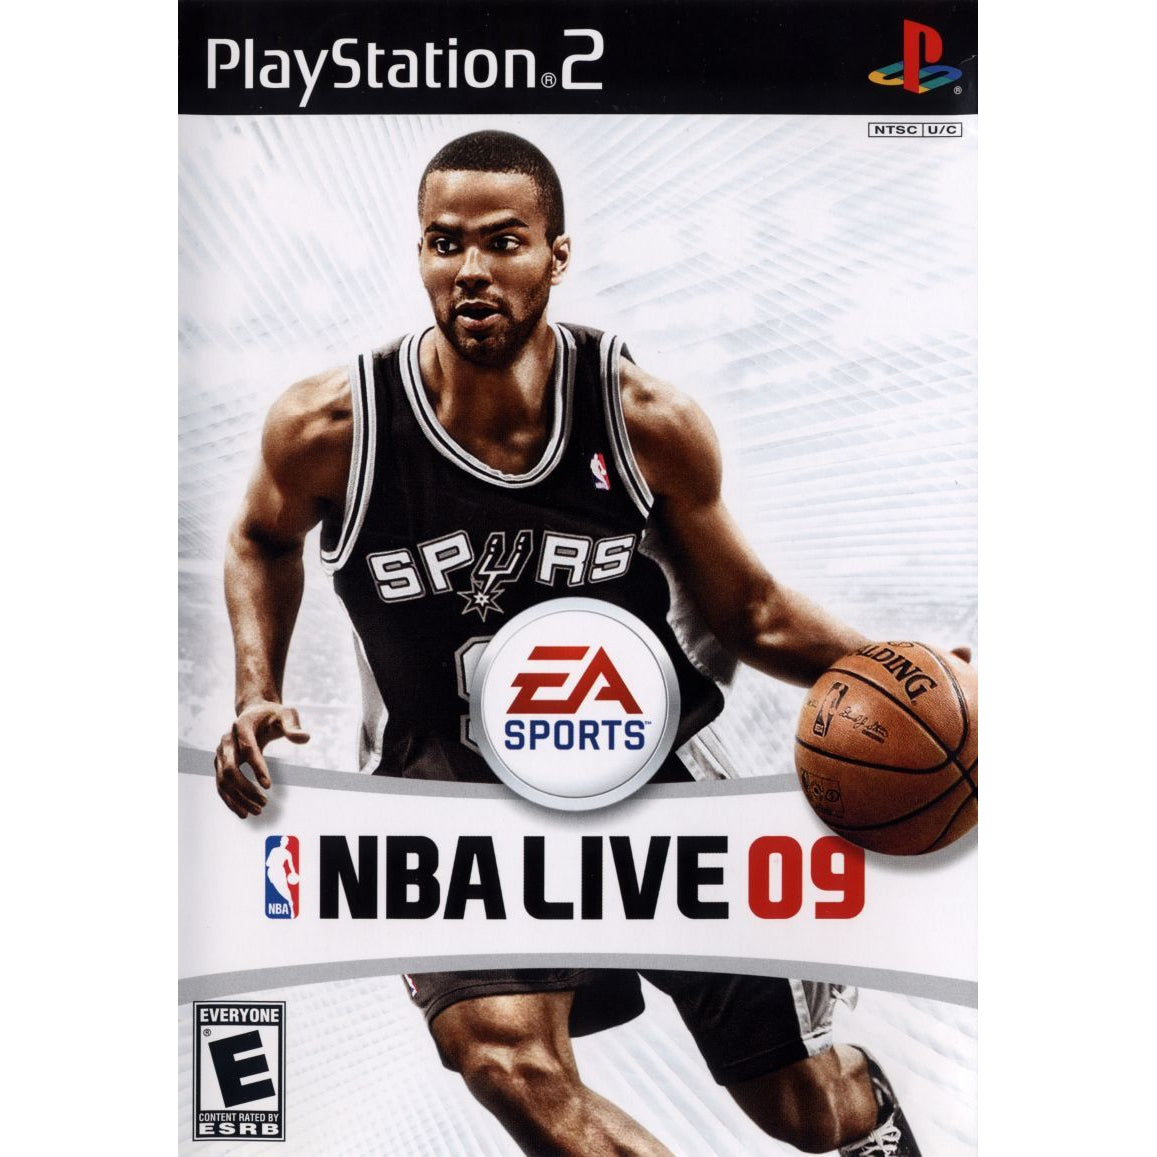 NBA Live 09 - PlayStation 2 (PS2) Game Complete - YourGamingShop.com - Buy, Sell, Trade Video Games Online. 120 Day Warranty. Satisfaction Guaranteed.